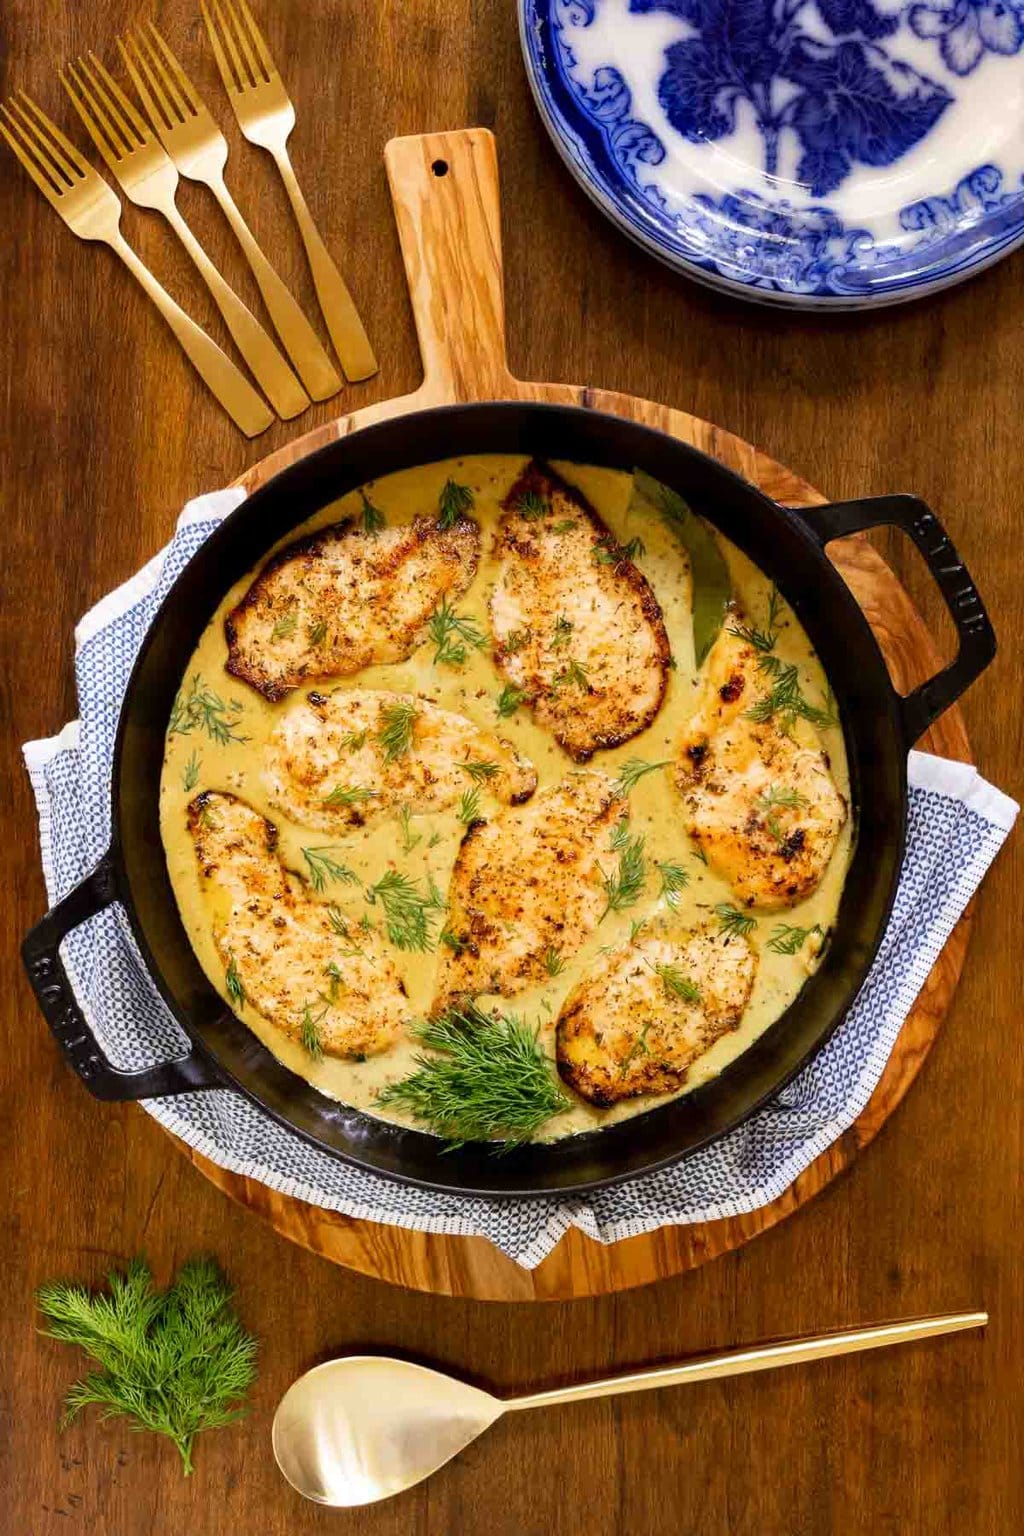 Vertical overhead photo of a black cast iron skillet with French Mustard Chicken Breasts (Poulet à la Moutarde Française) on a wood table.